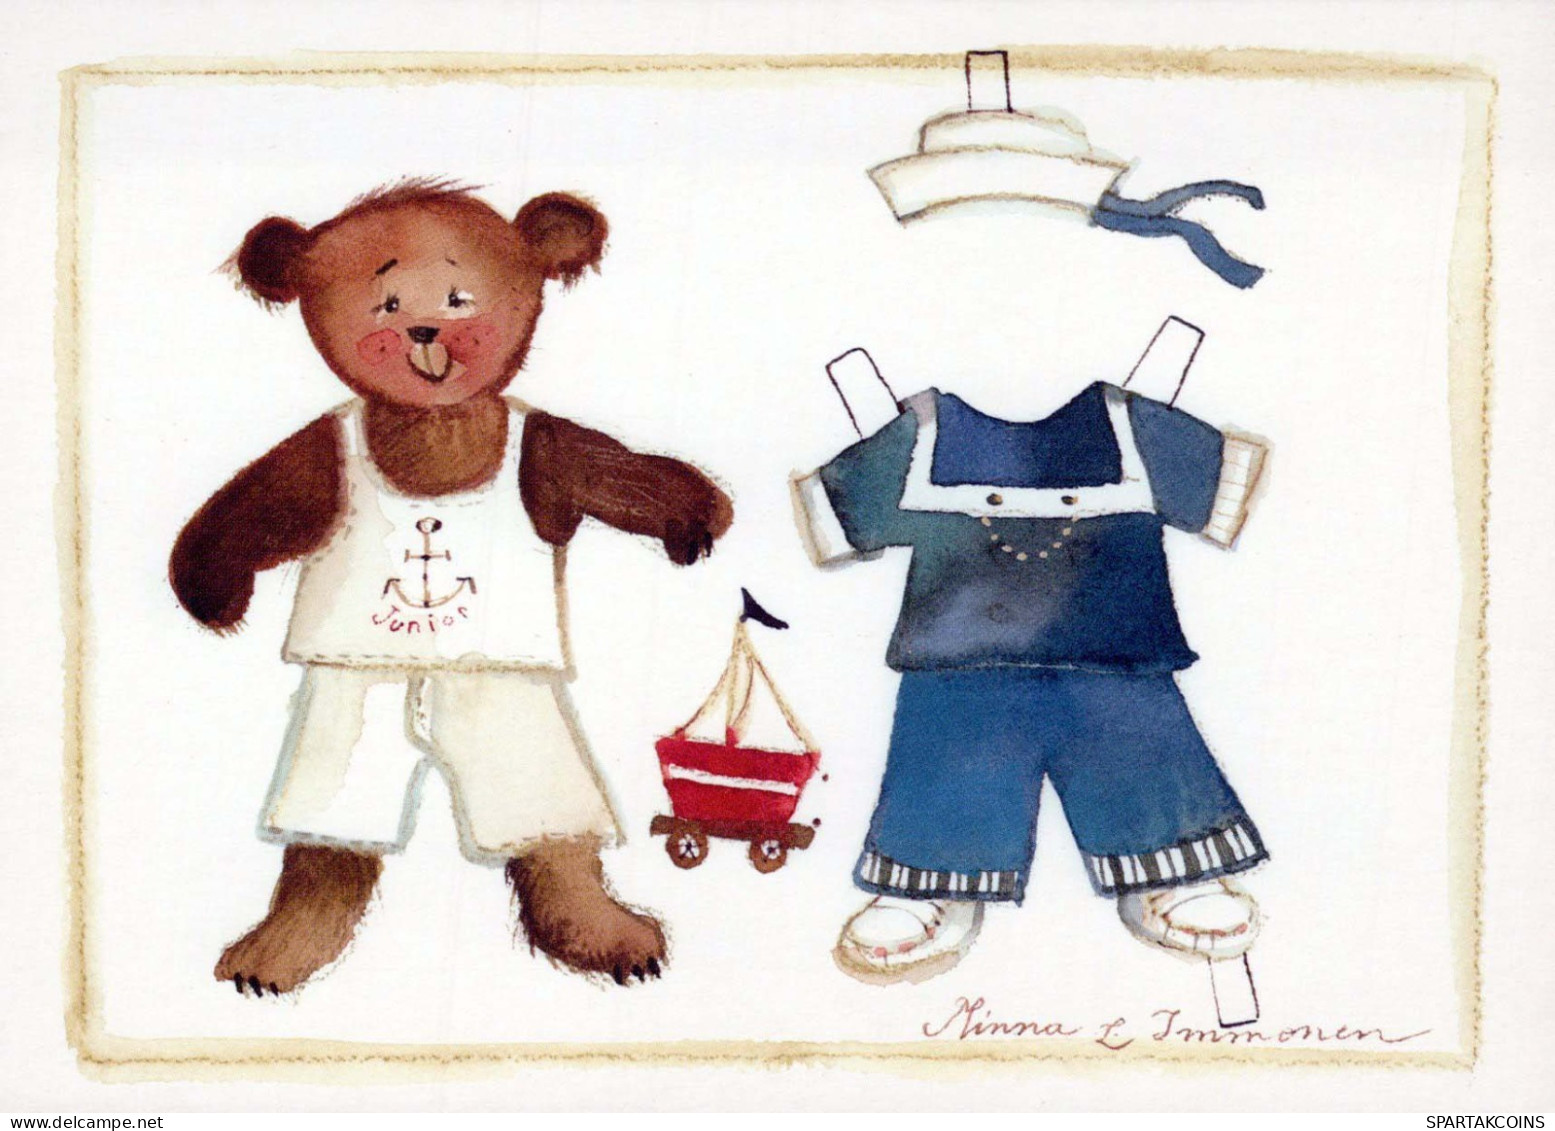 NASCERE Animale Vintage Cartolina CPSM #PBS349.IT - Bears